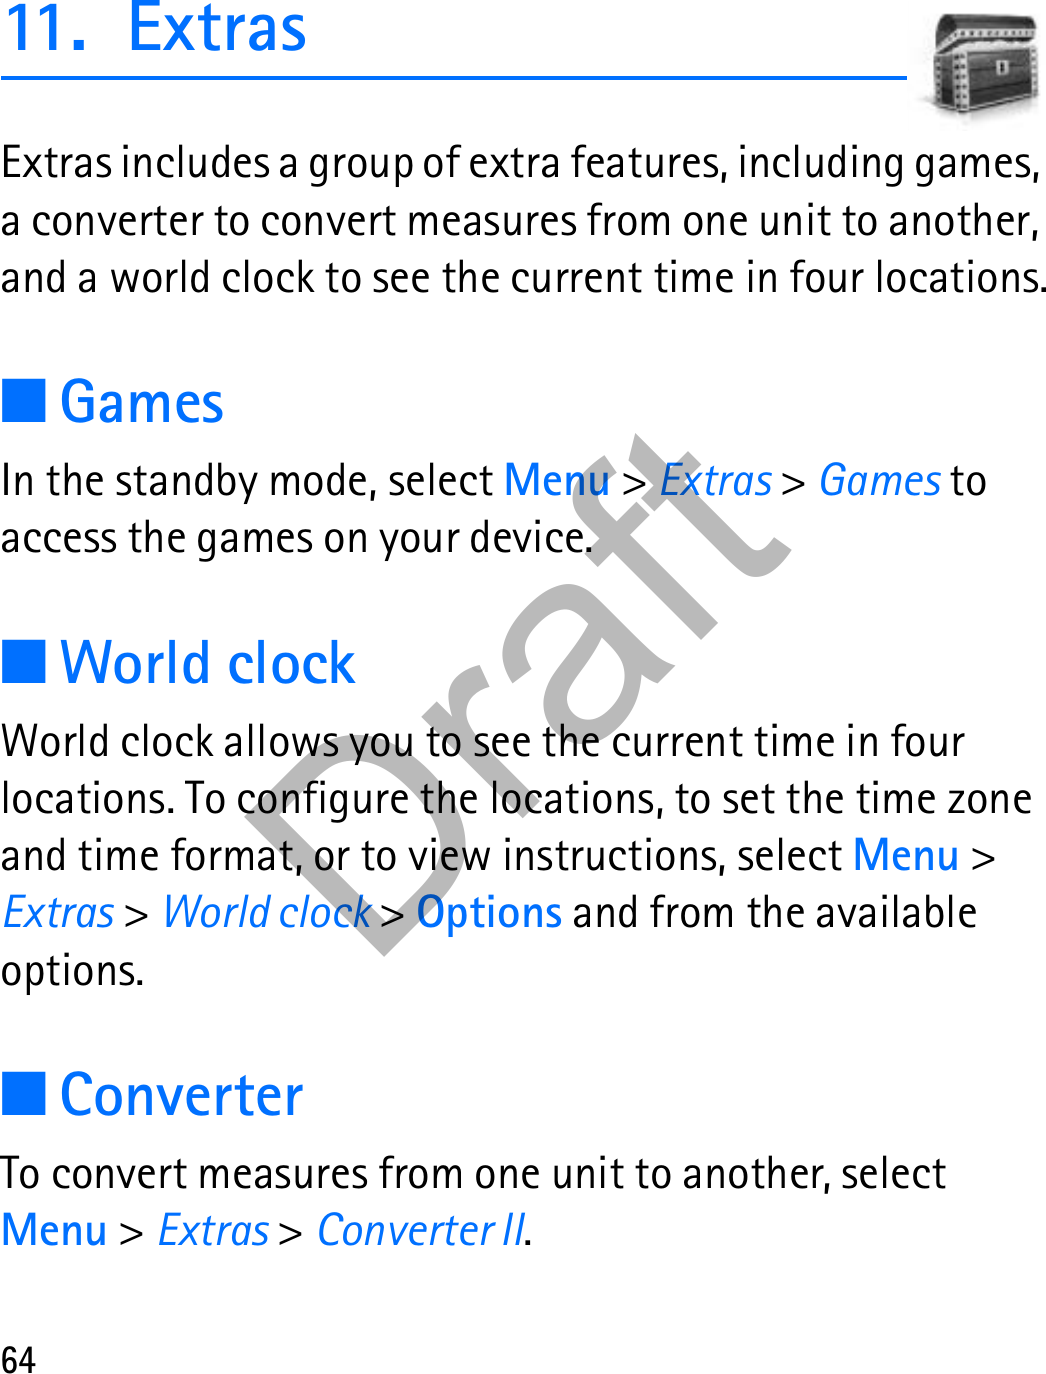 6411. ExtrasExtras includes a group of extra features, including games, a converter to convert measures from one unit to another, and a world clock to see the current time in four locations.■GamesIn the standby mode, select Menu &gt; Extras &gt; Games to access the games on your device.■World clockWorld clock allows you to see the current time in four locations. To configure the locations, to set the time zone and time format, or to view instructions, select Menu &gt; Extras &gt; World clock &gt; Options and from the available options.■ConverterTo convert measures from one unit to another, select Menu &gt; Extras &gt; Converter II. Draft